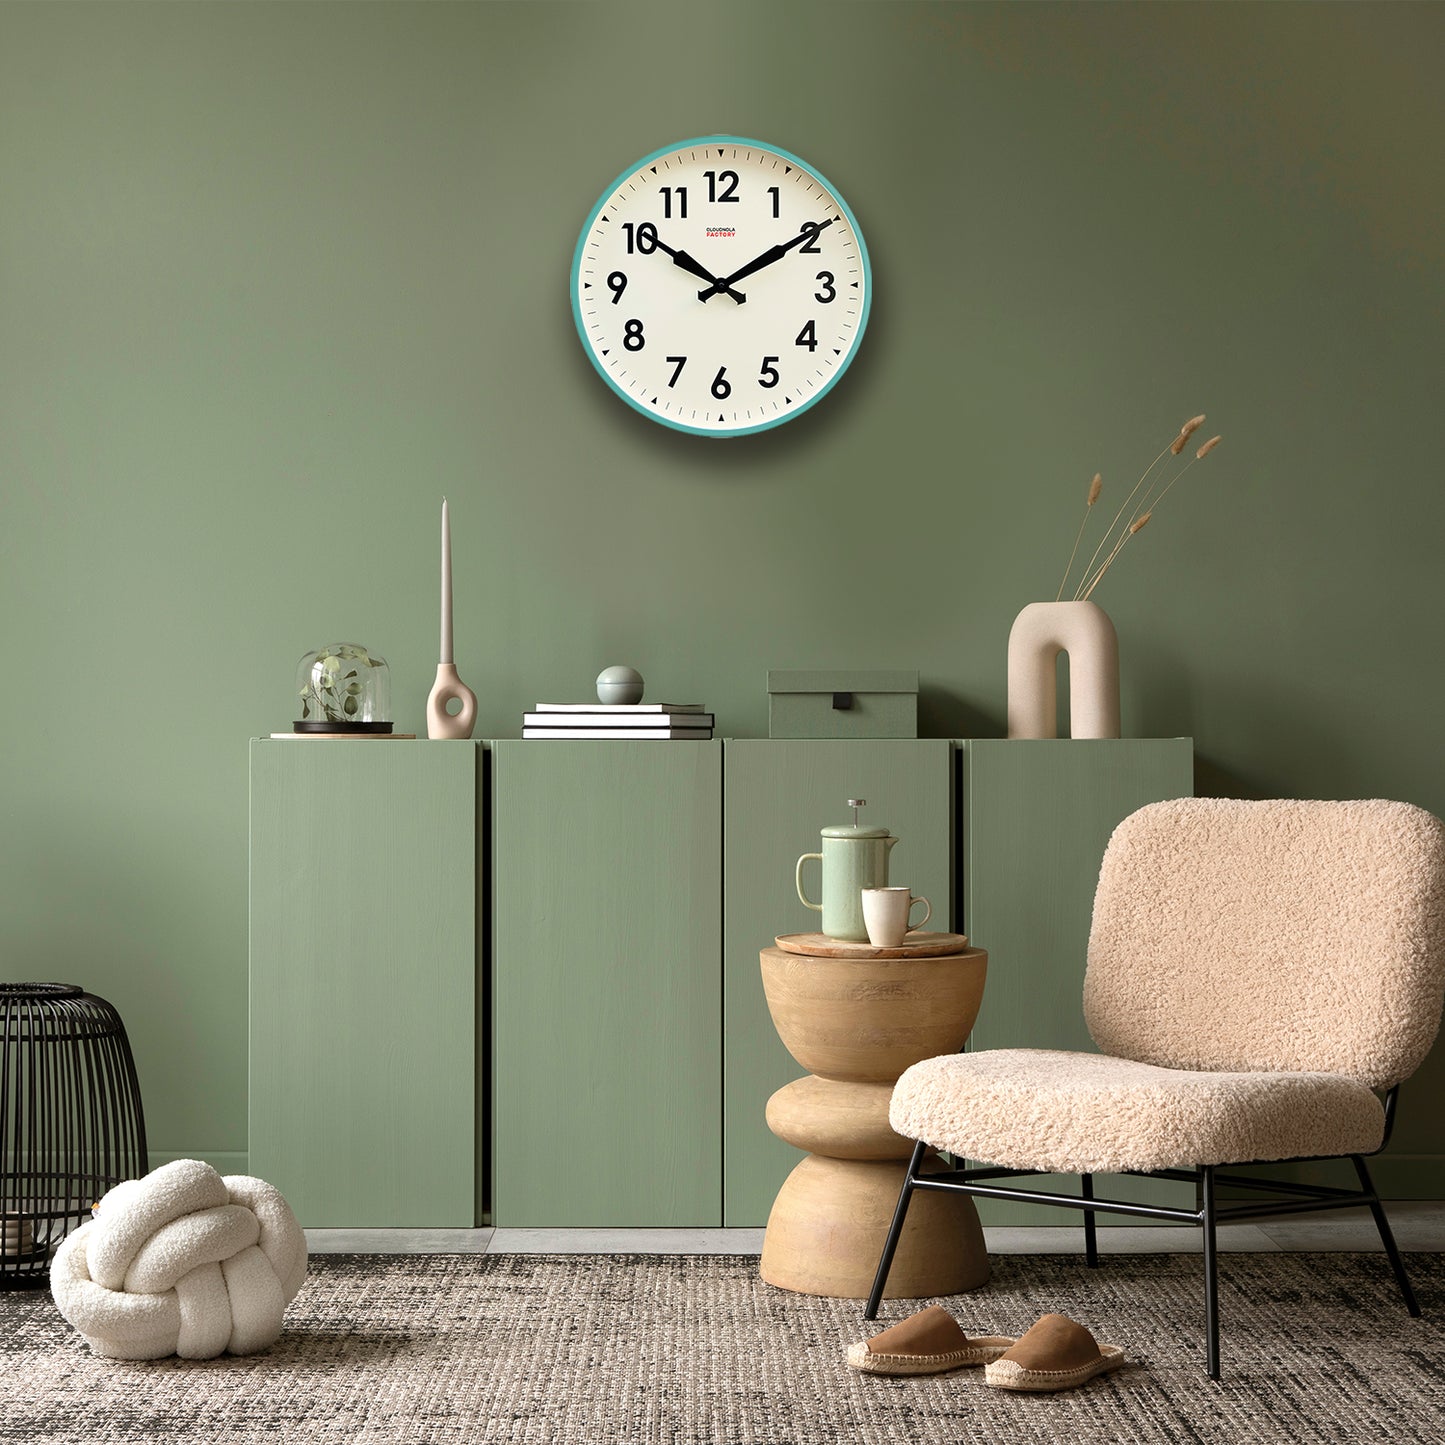 Factory XL Turquoise - Wall Clock - Silent - Steel Case